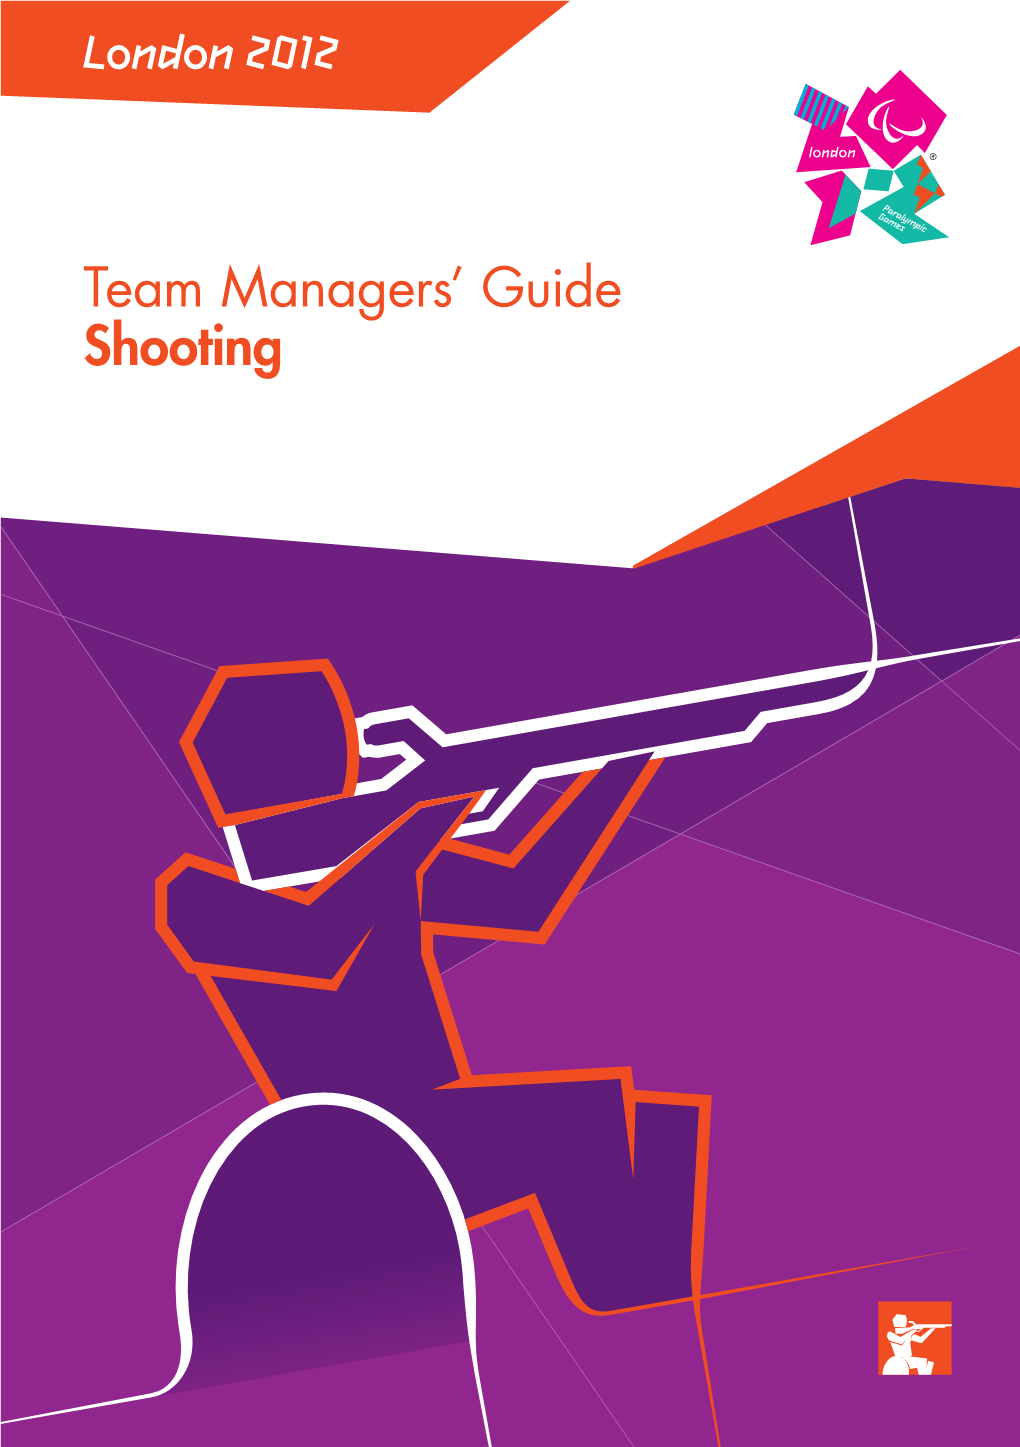 London 2012 Team Managers' Guide Shooting